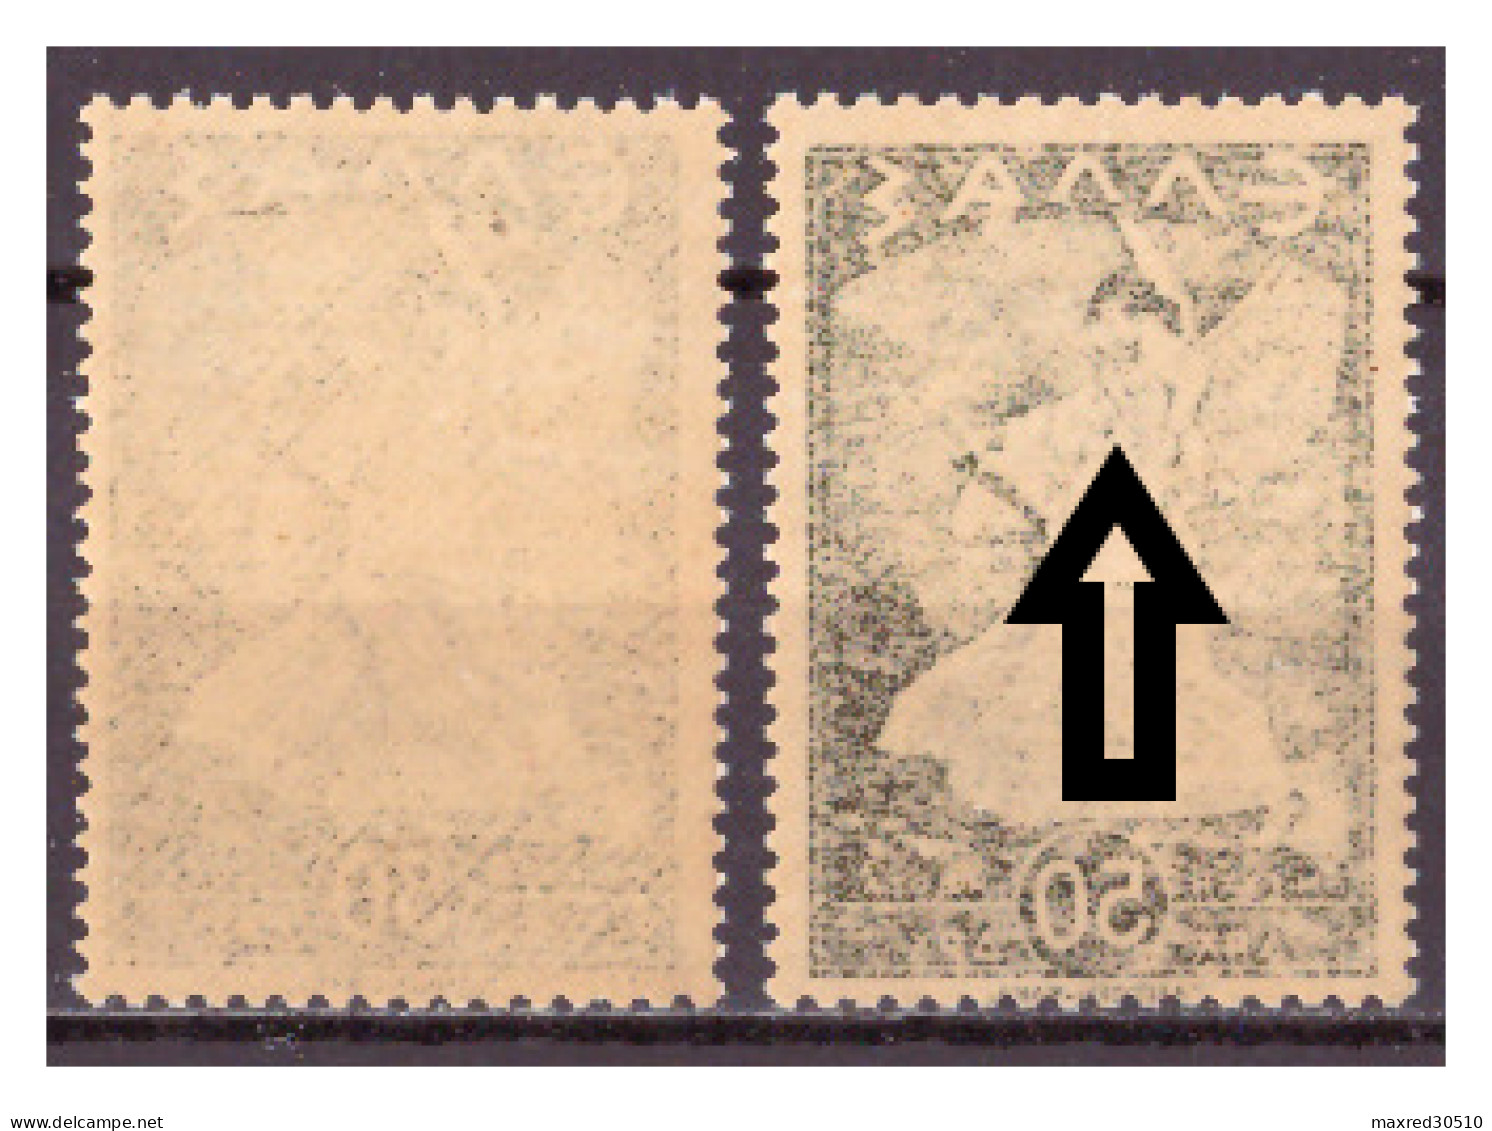 GREECE 1945 2X50L. OF THE "GLORY ISSUE" THE 2ND ONE (SEE ARROWS) WITH MIRROR PRINTING AT THE GUM ERROR MNH - Variétés Et Curiosités